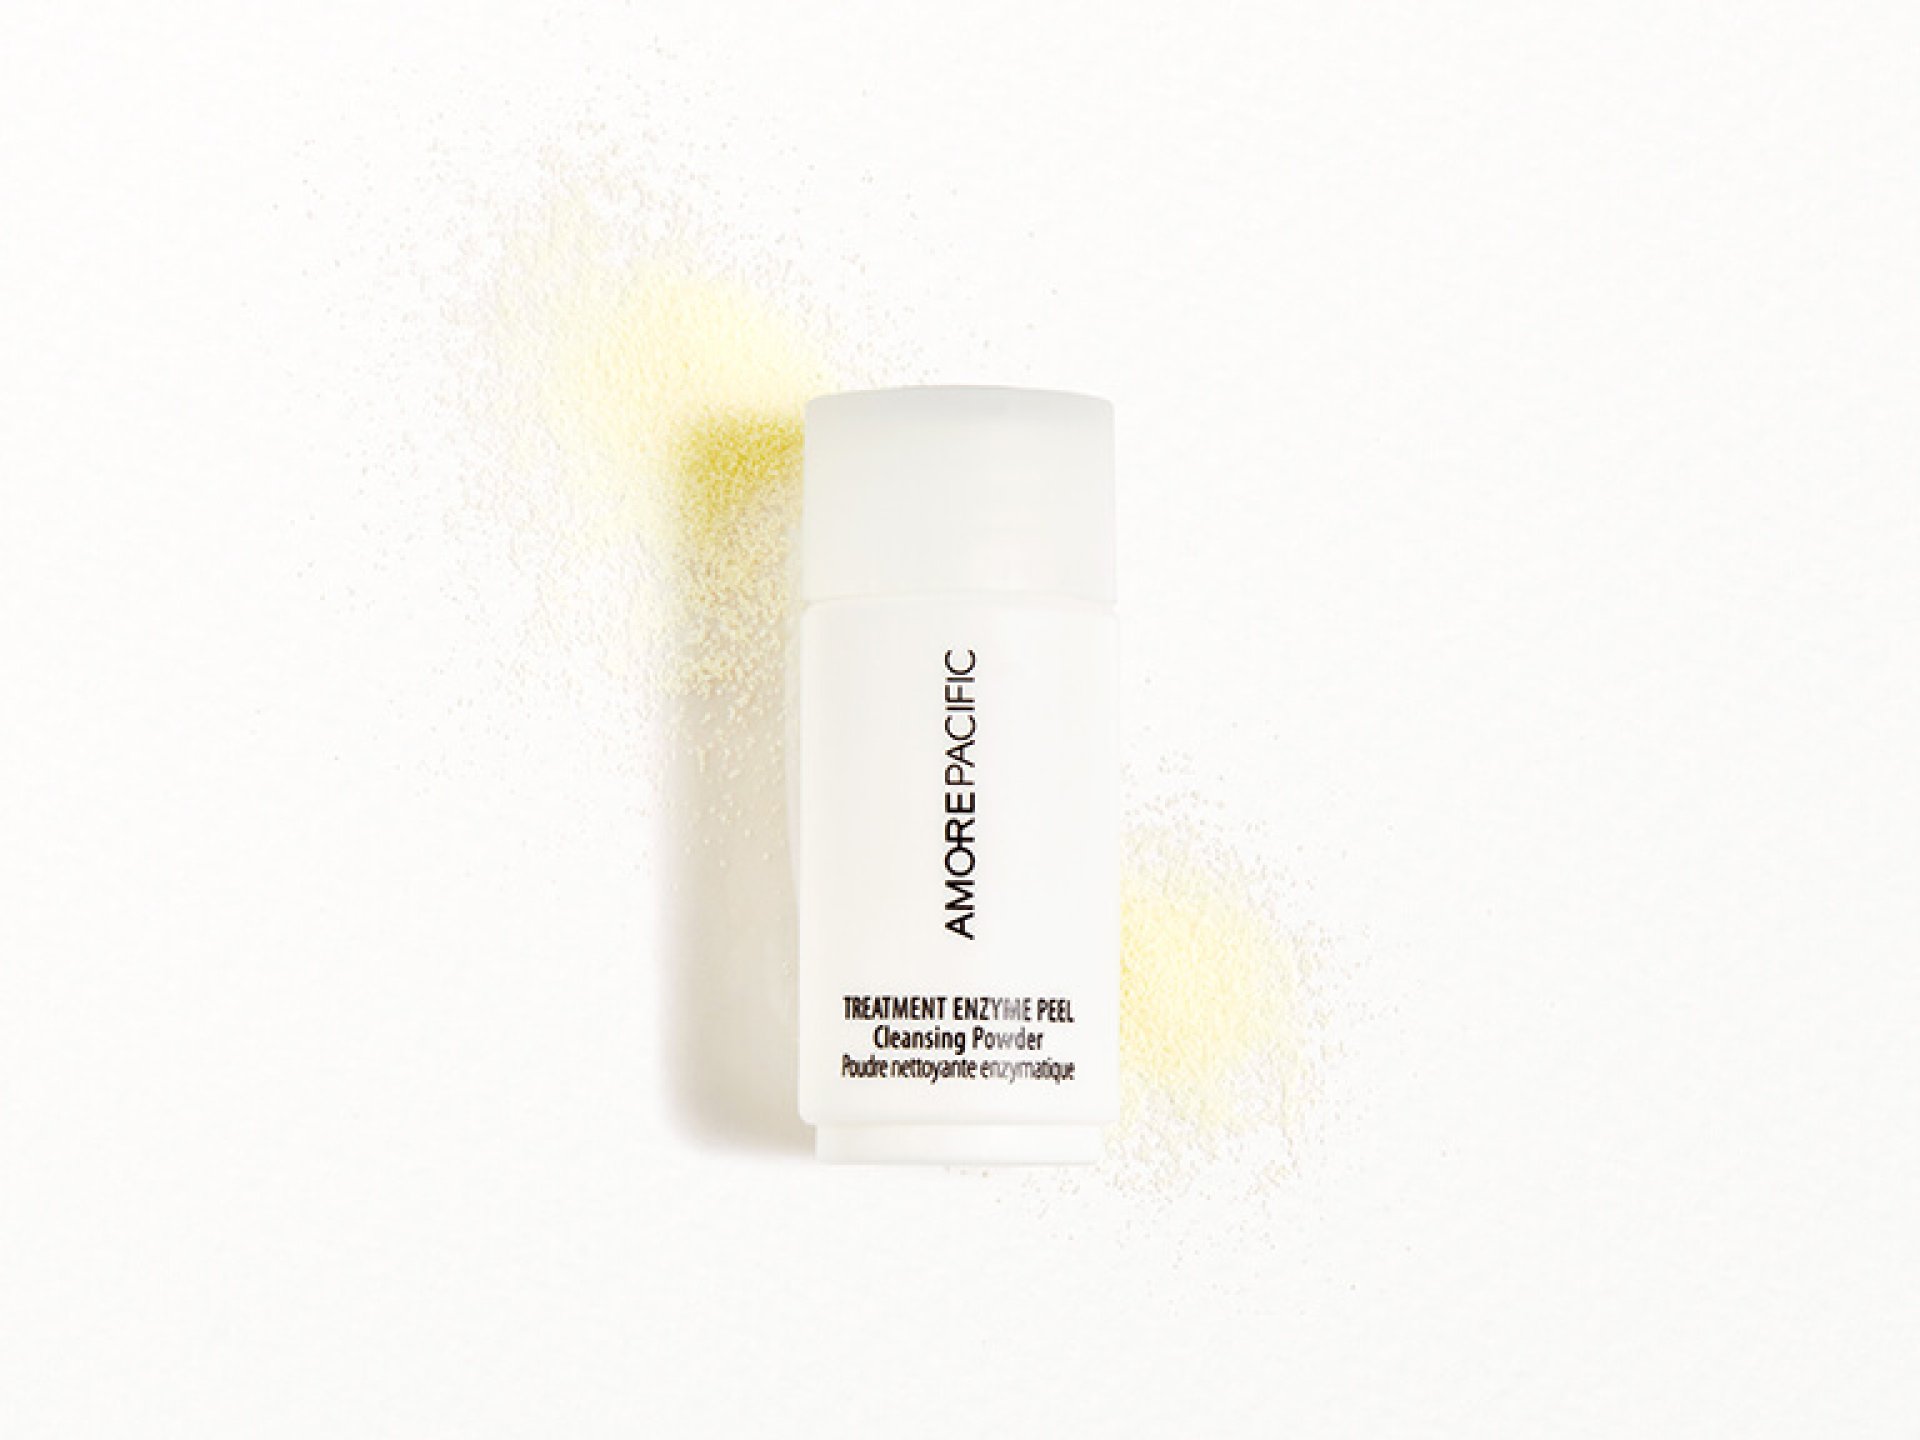 AMOREPACIFIC Treatment Enzyme Peel Daily Cleansing Powder